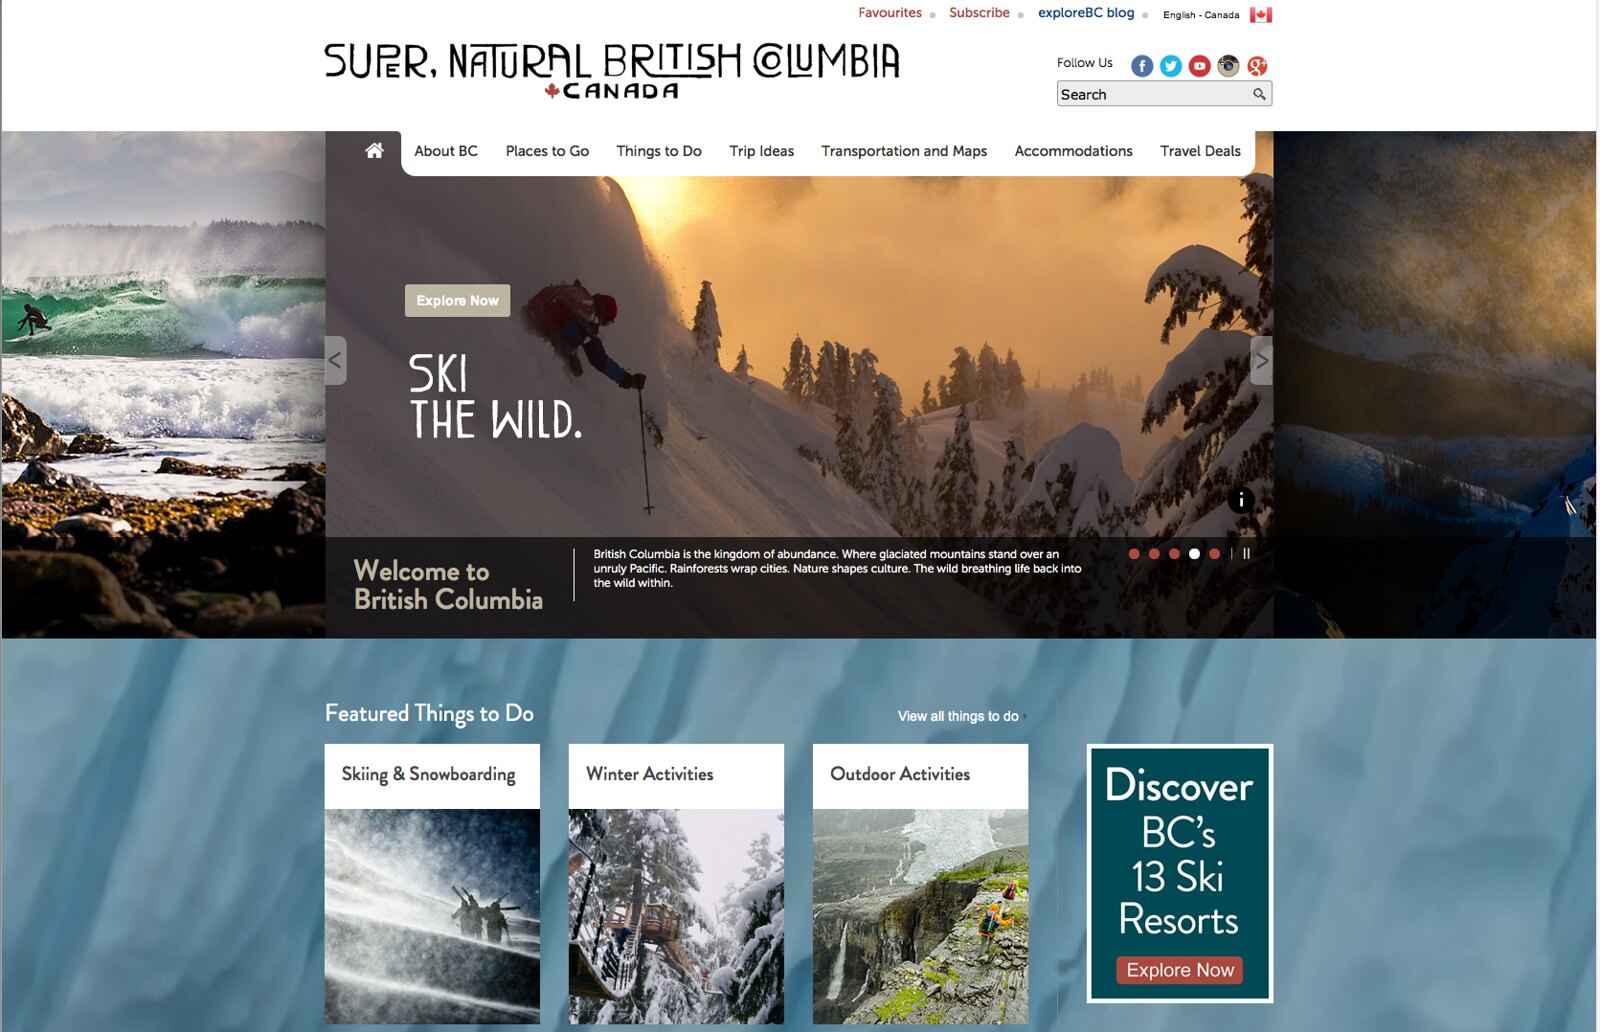 Travel website showing outdoor activities in B.C., such as skiing and surfing.